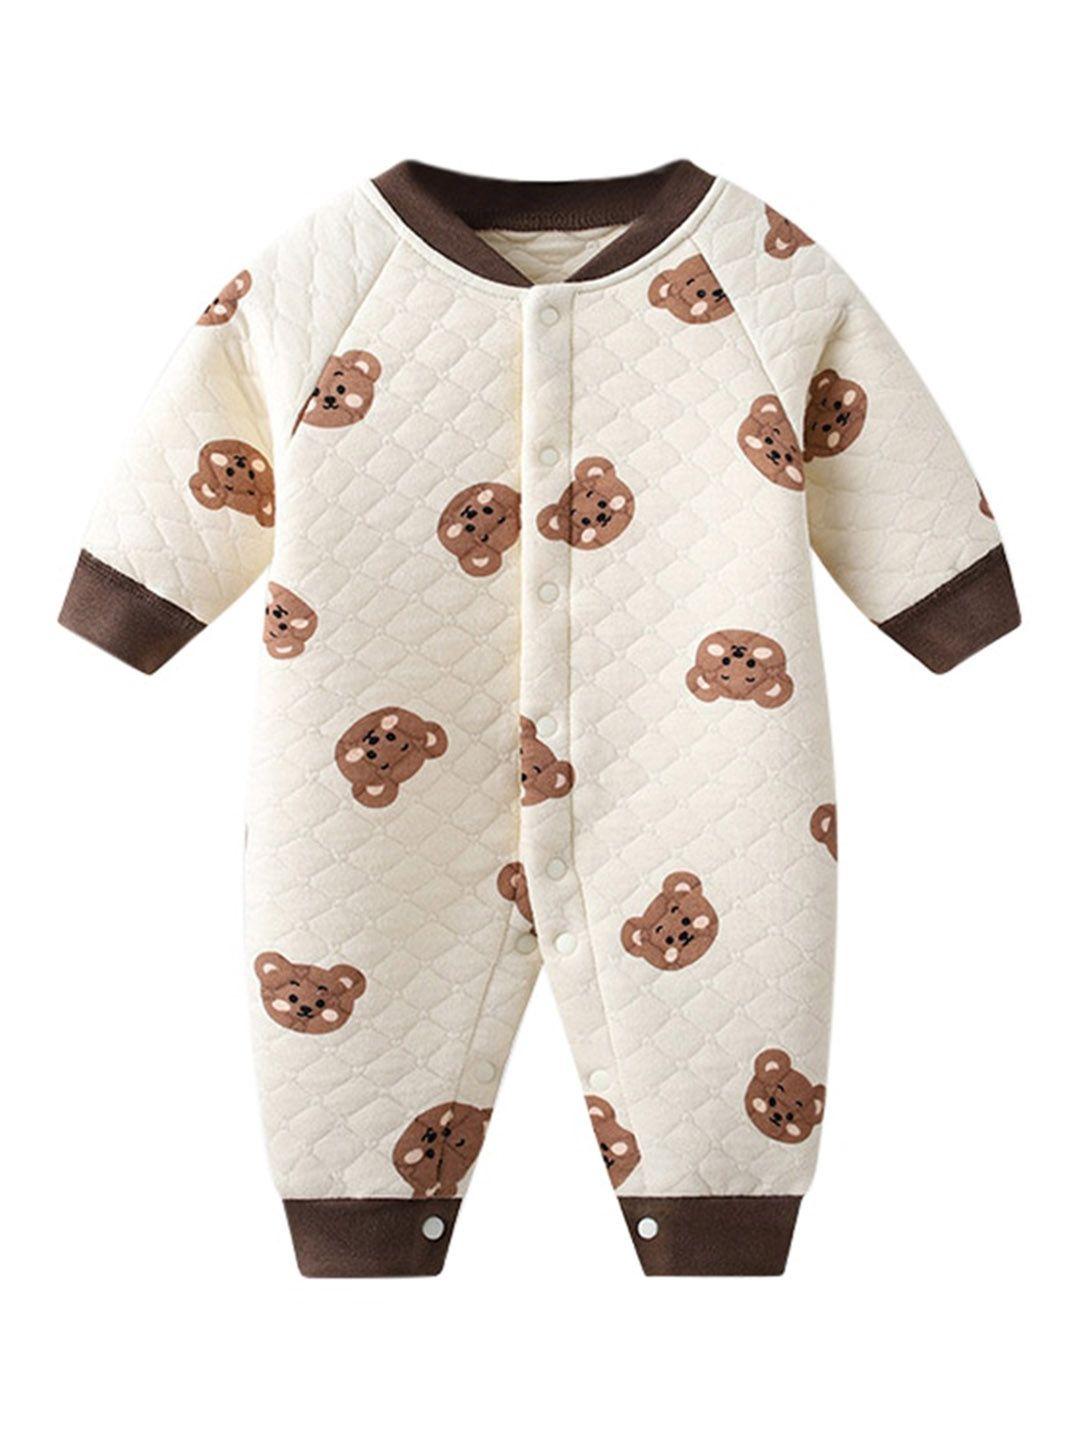 stylecast cream & brown infant boys graphic printed cotton rompers